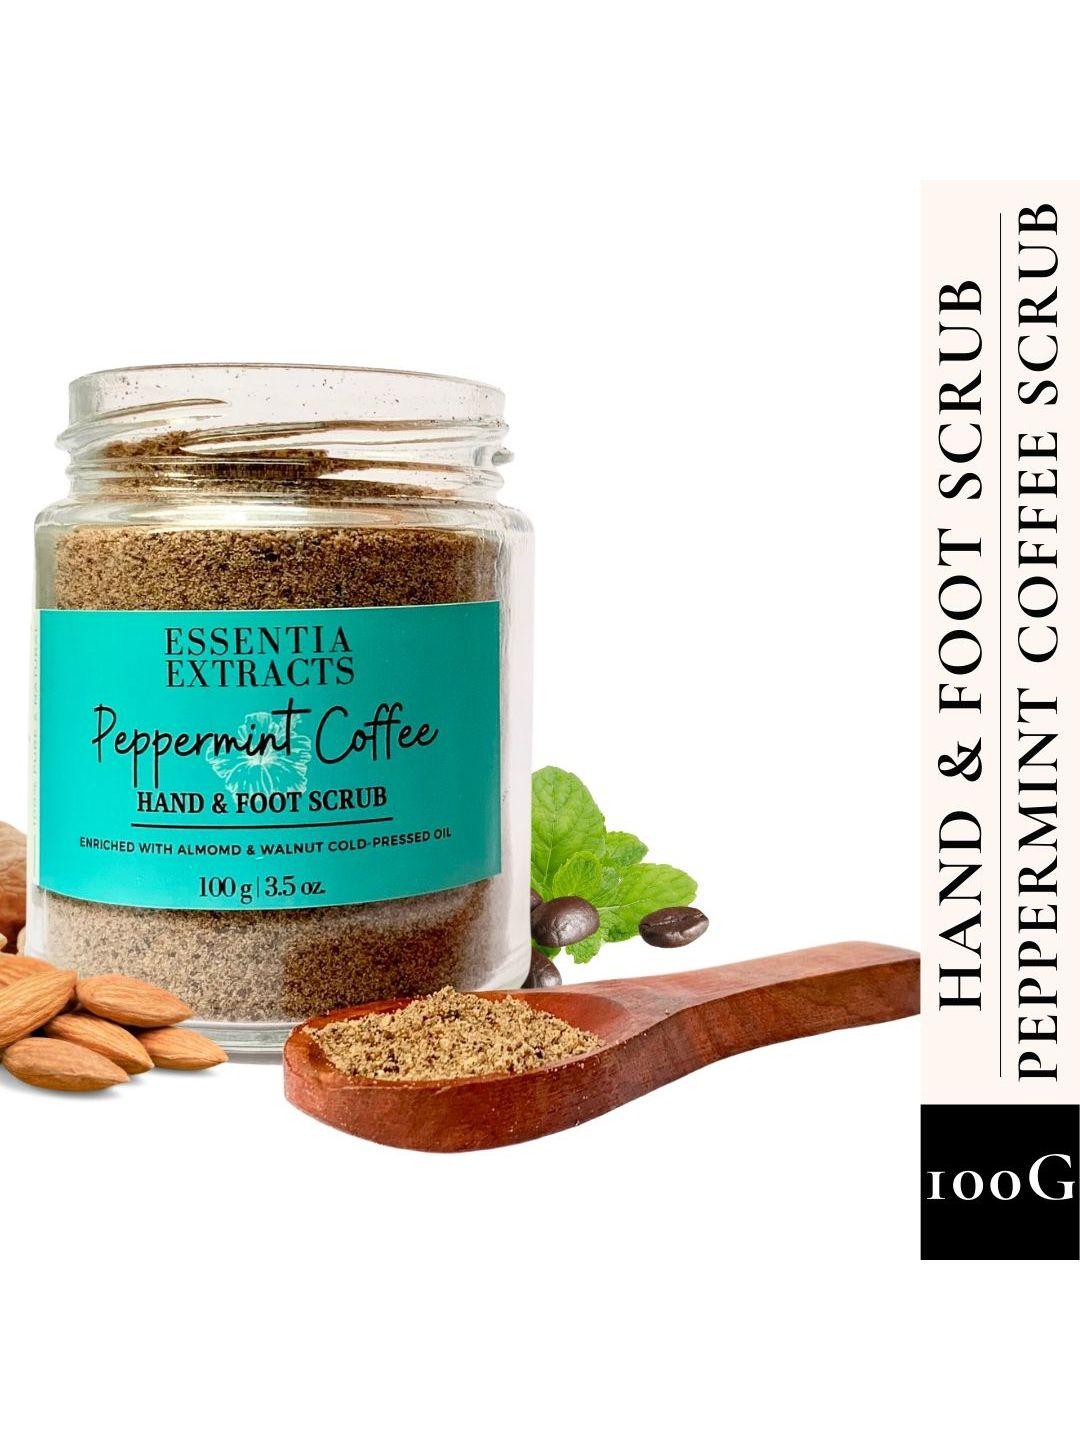 essentia extracts peppermint coffee hand & foot scrub - 100 g